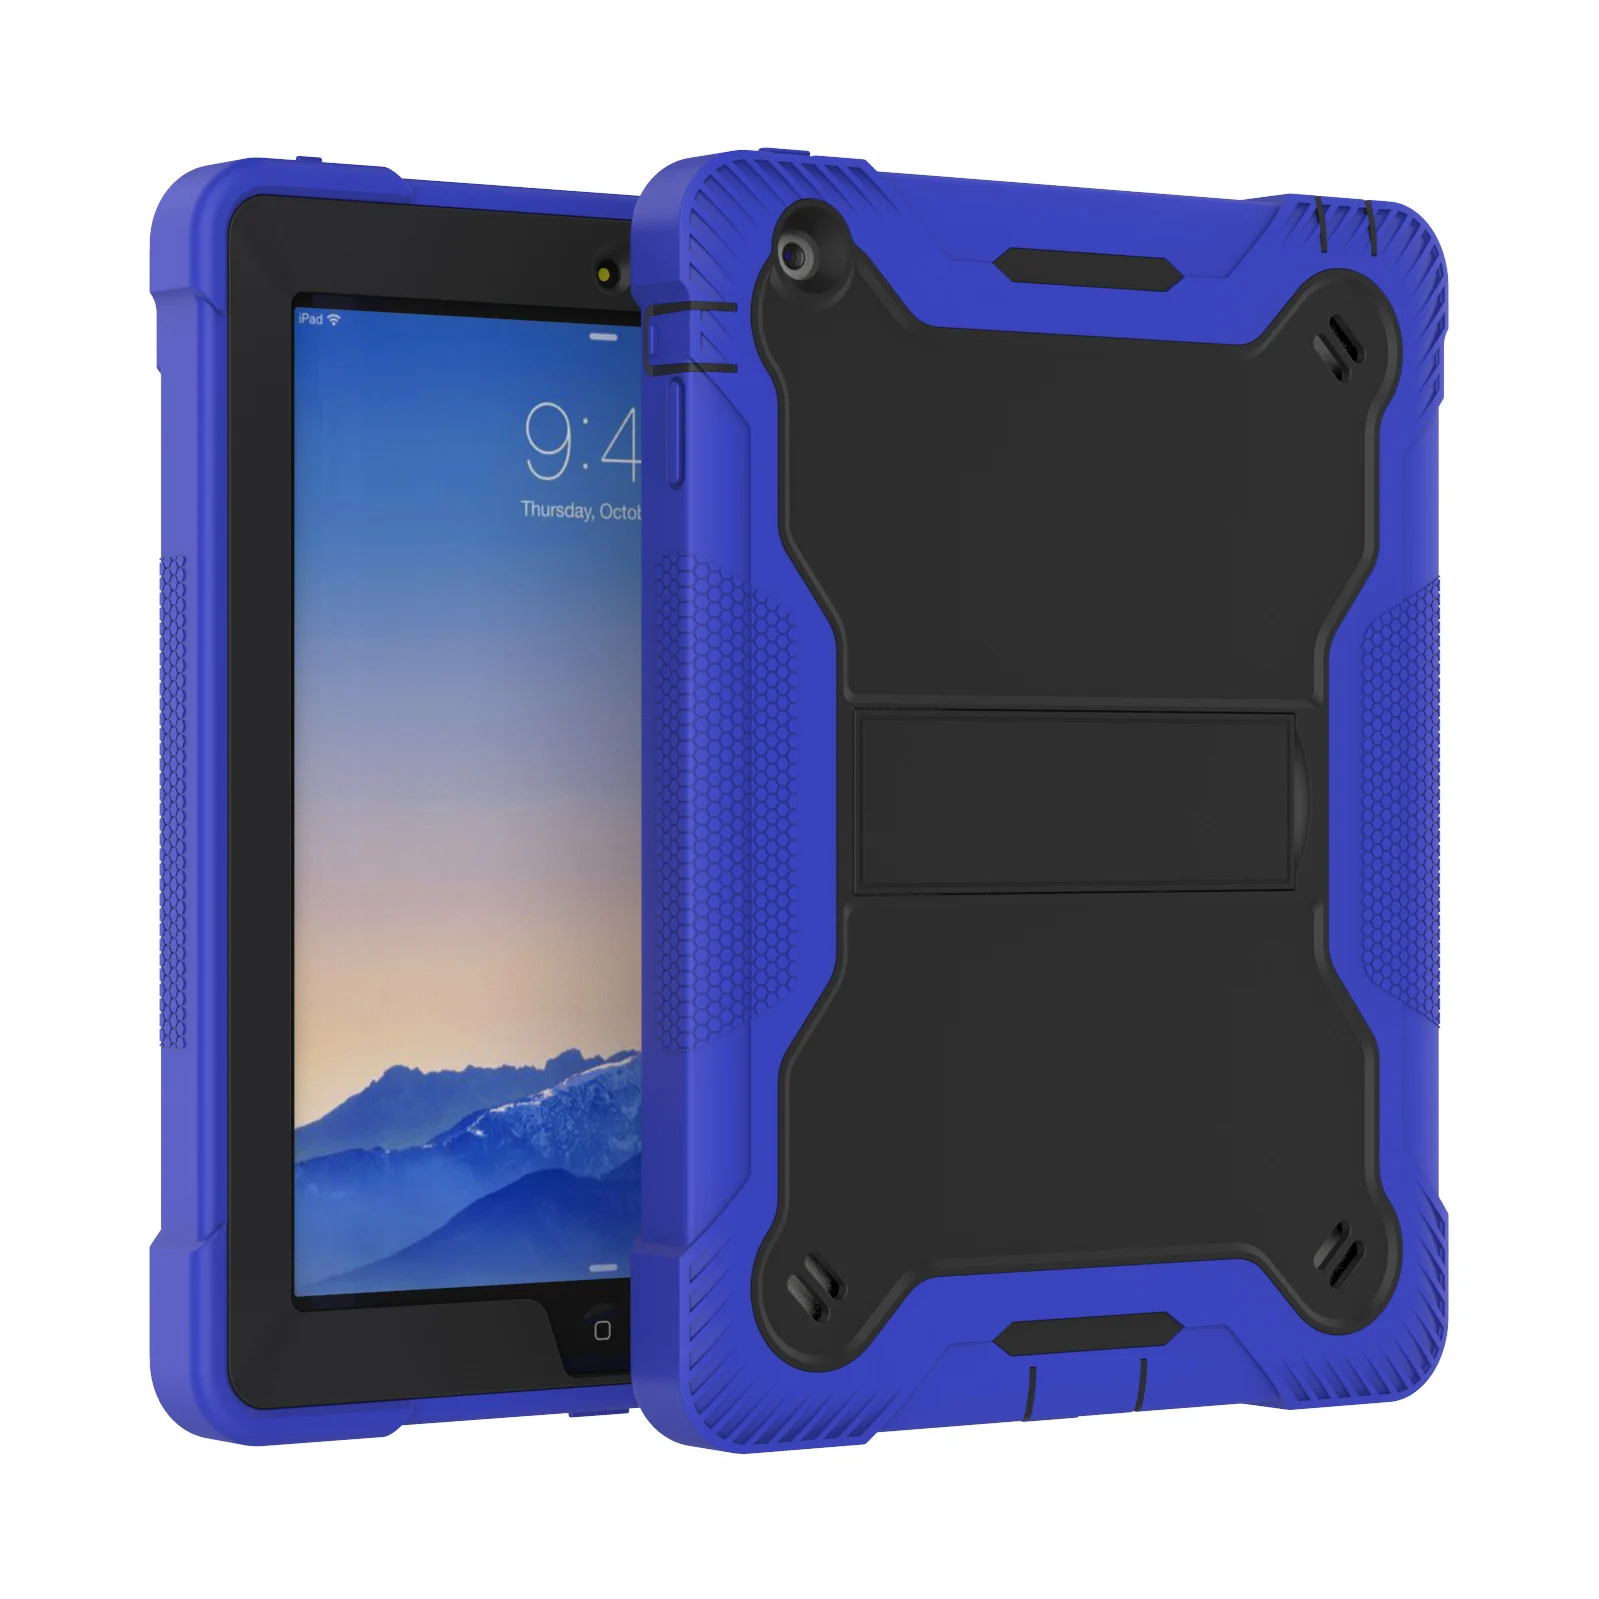 

Heavy Duty Rugged Armour Shockproof Covers Educational Kids Tablet Phone Case For Ipad 4 Case Kid, 8 colors